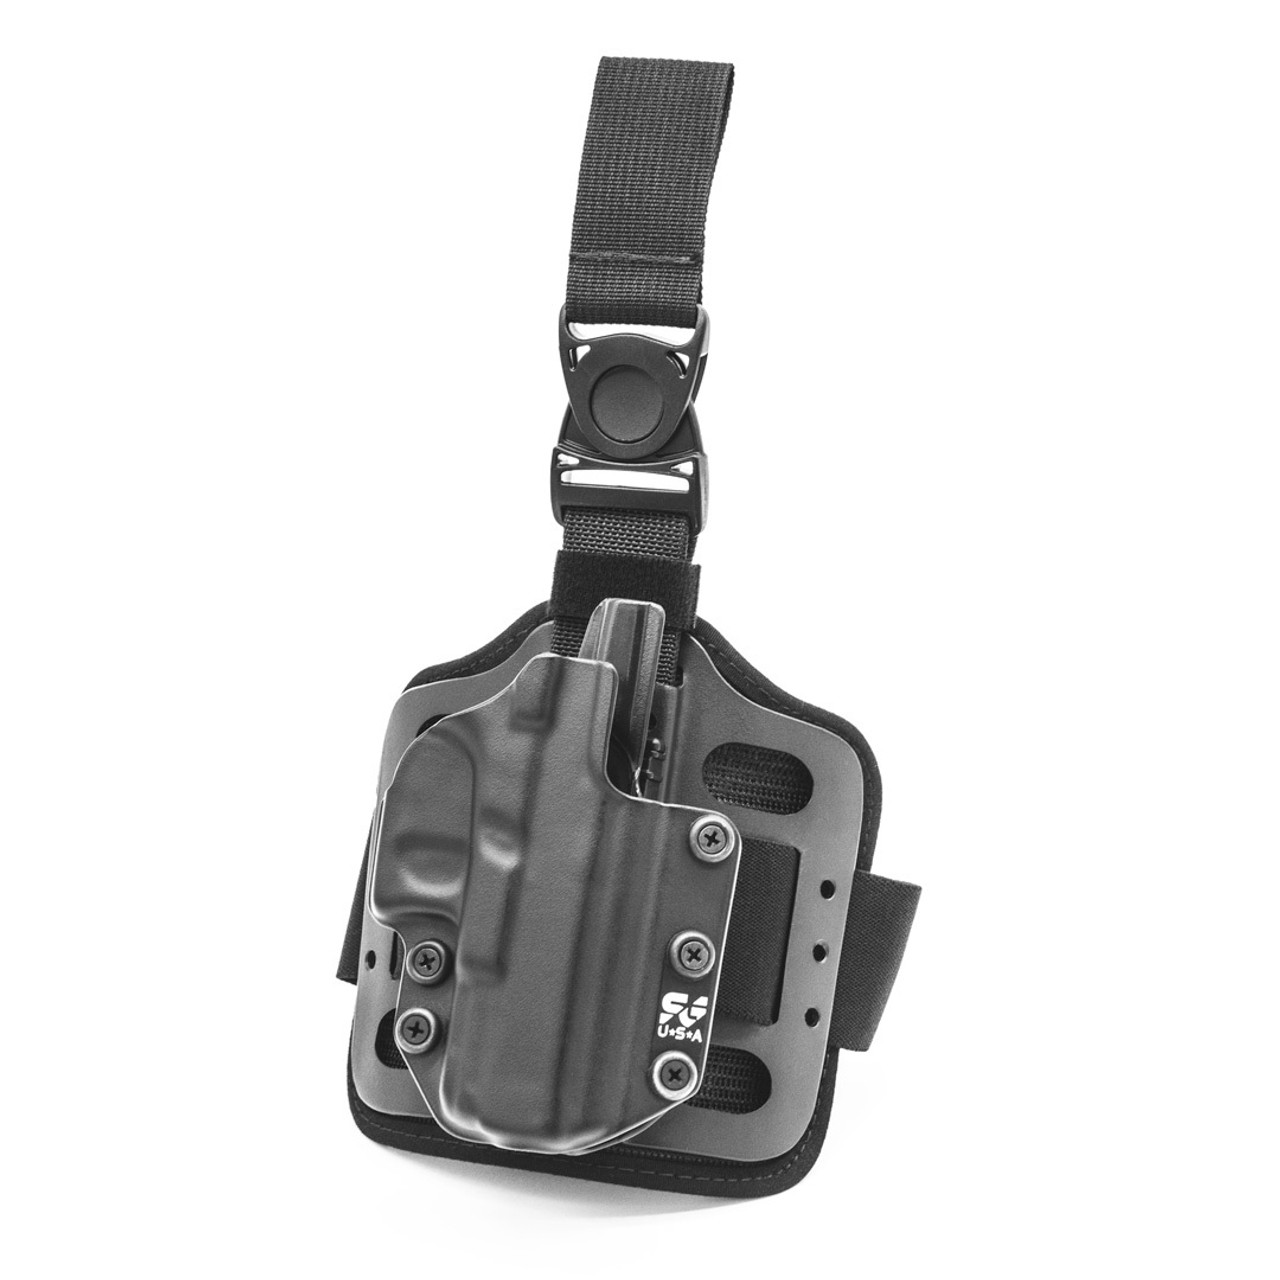 StealthGearUSA® Ventcore 1.0 Drop-Leg Plate and Harness Only